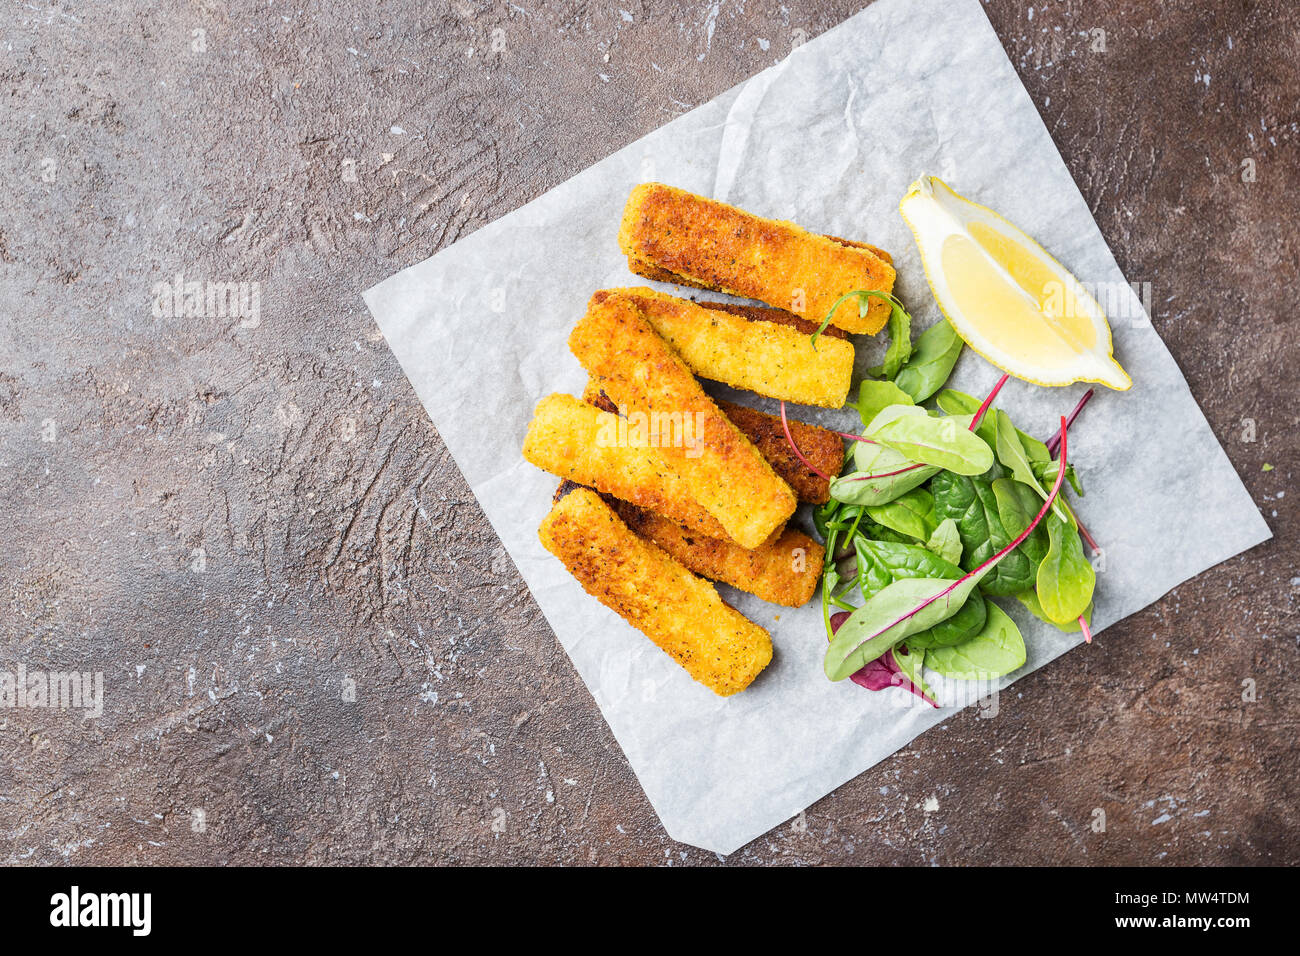 Tasty savory snack of crumbed fish fingers sticks served on paper with lemon over dark stone background, top view with copy space Stock Photo